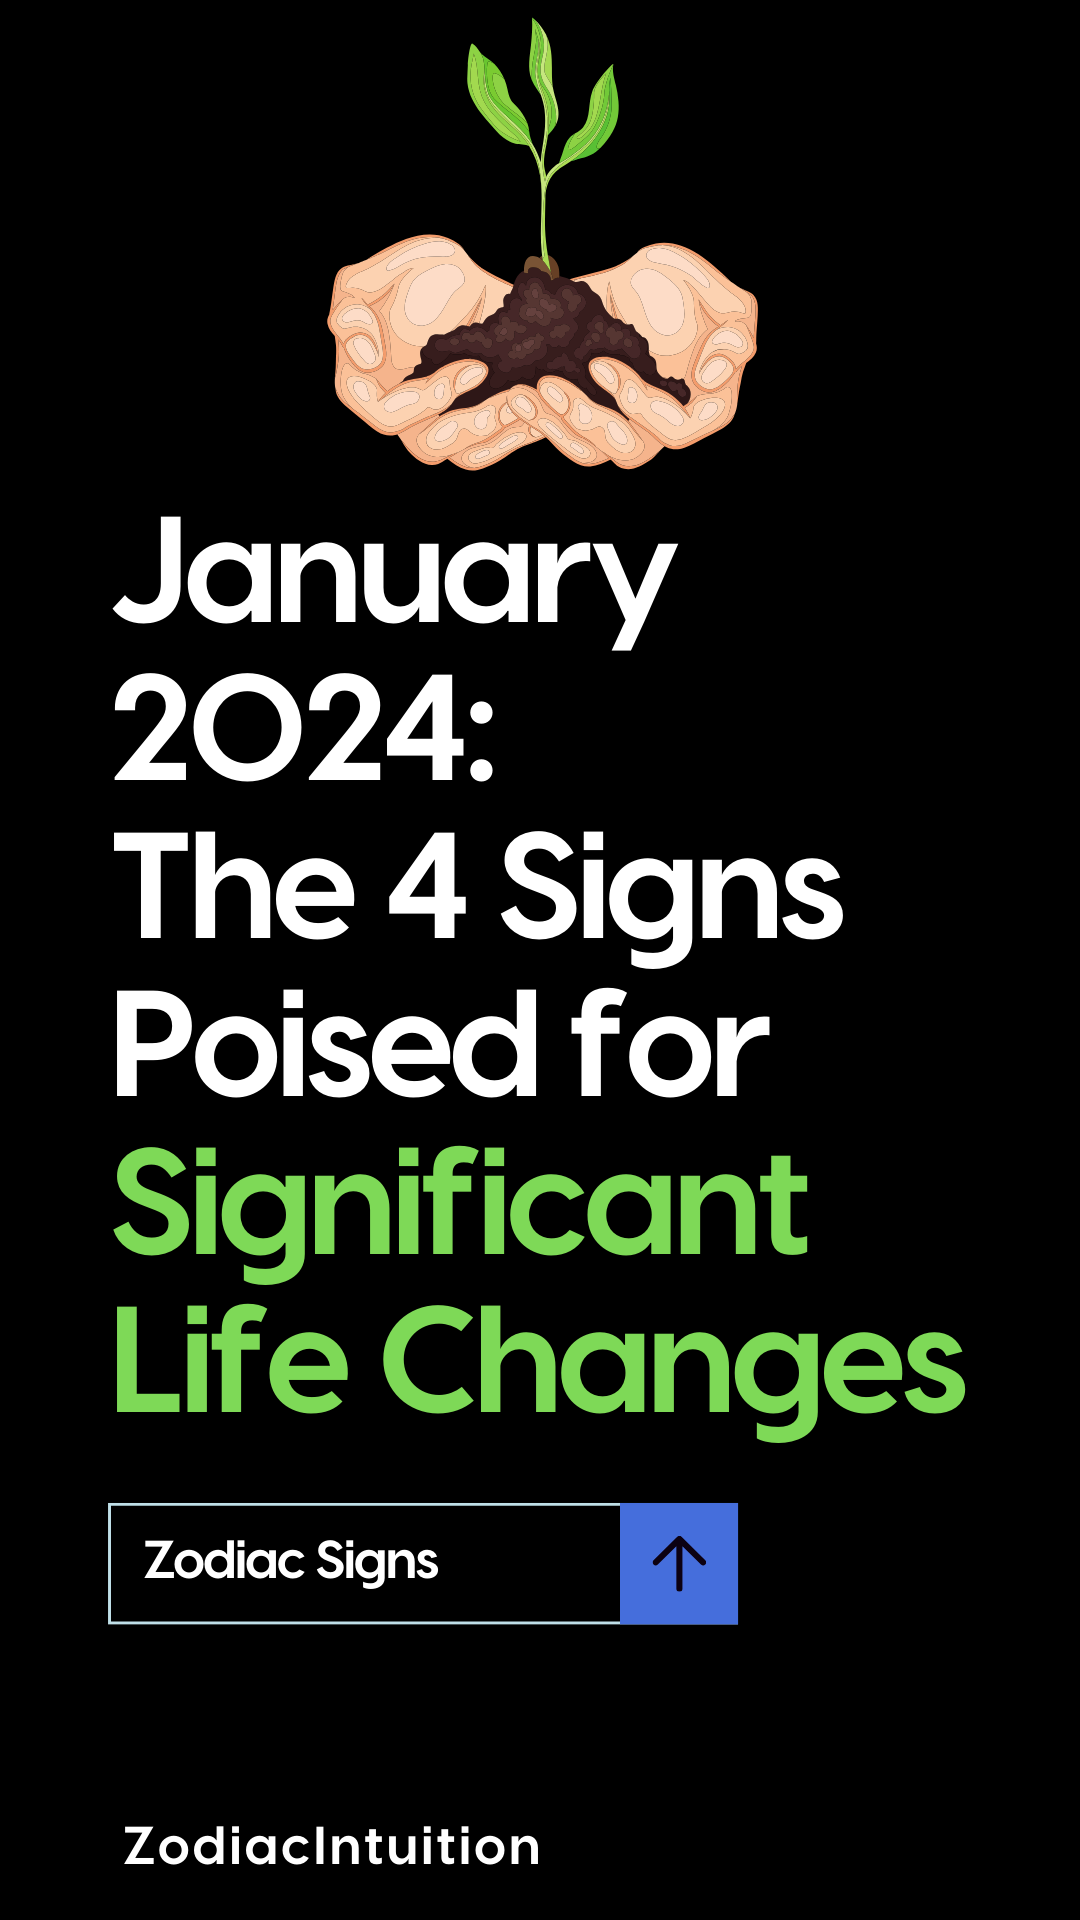 January 2024: The 4 Signs Poised for Significant Life Changes